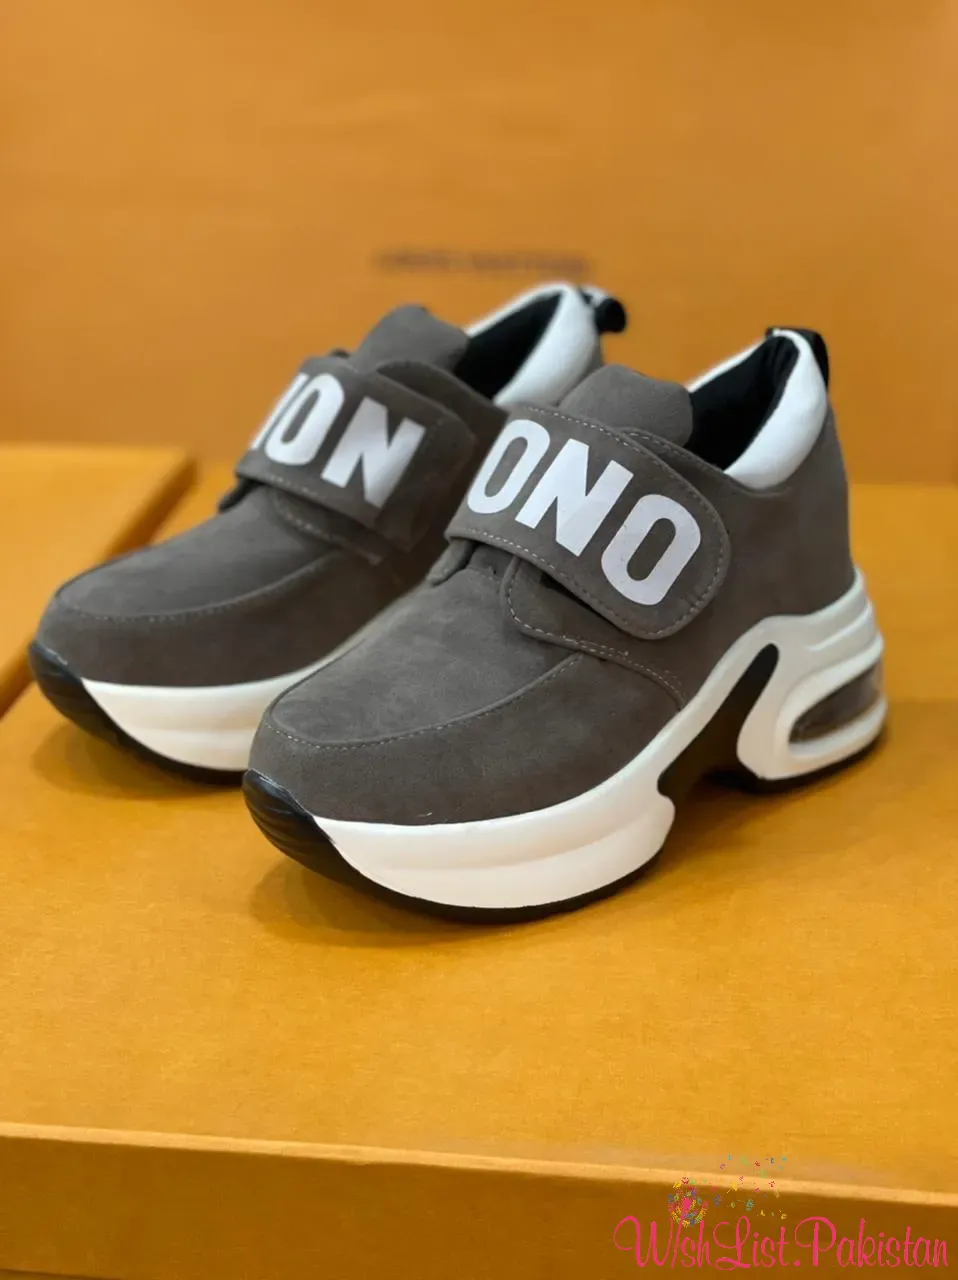 Onon Gray Highshoes